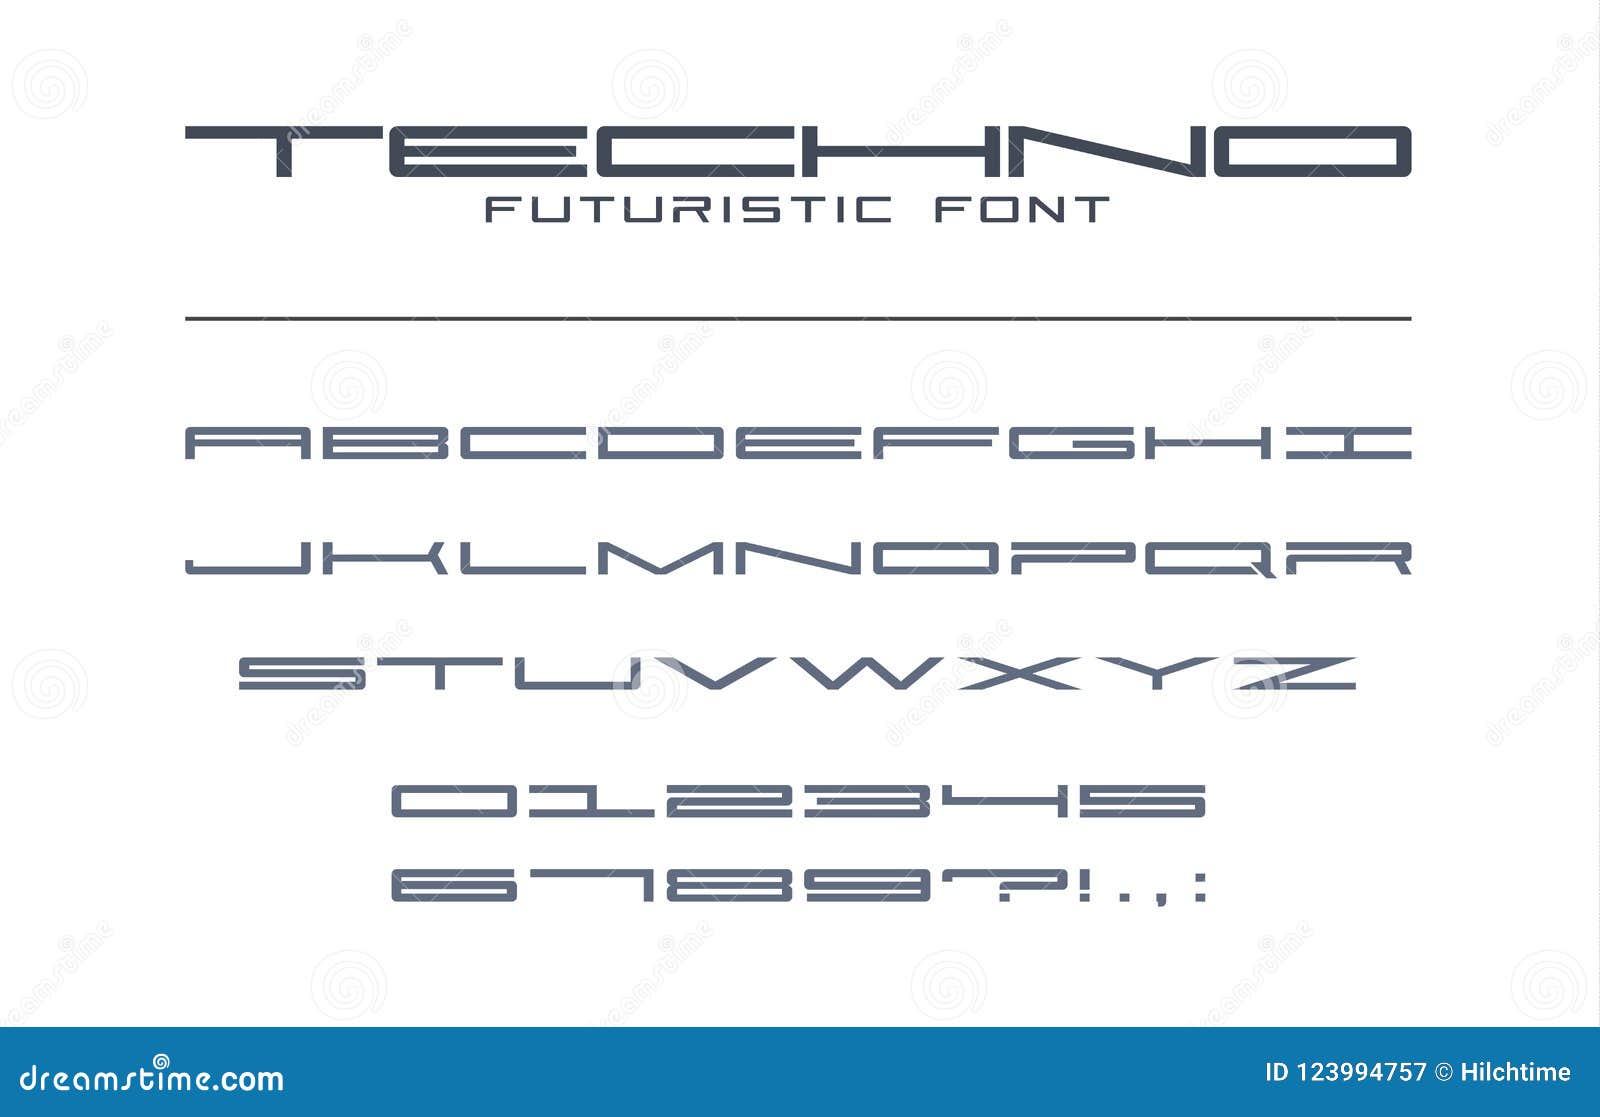 techno futuristic wide font. geometric, sport, future, digital technology alphabet. letters and numbers for military